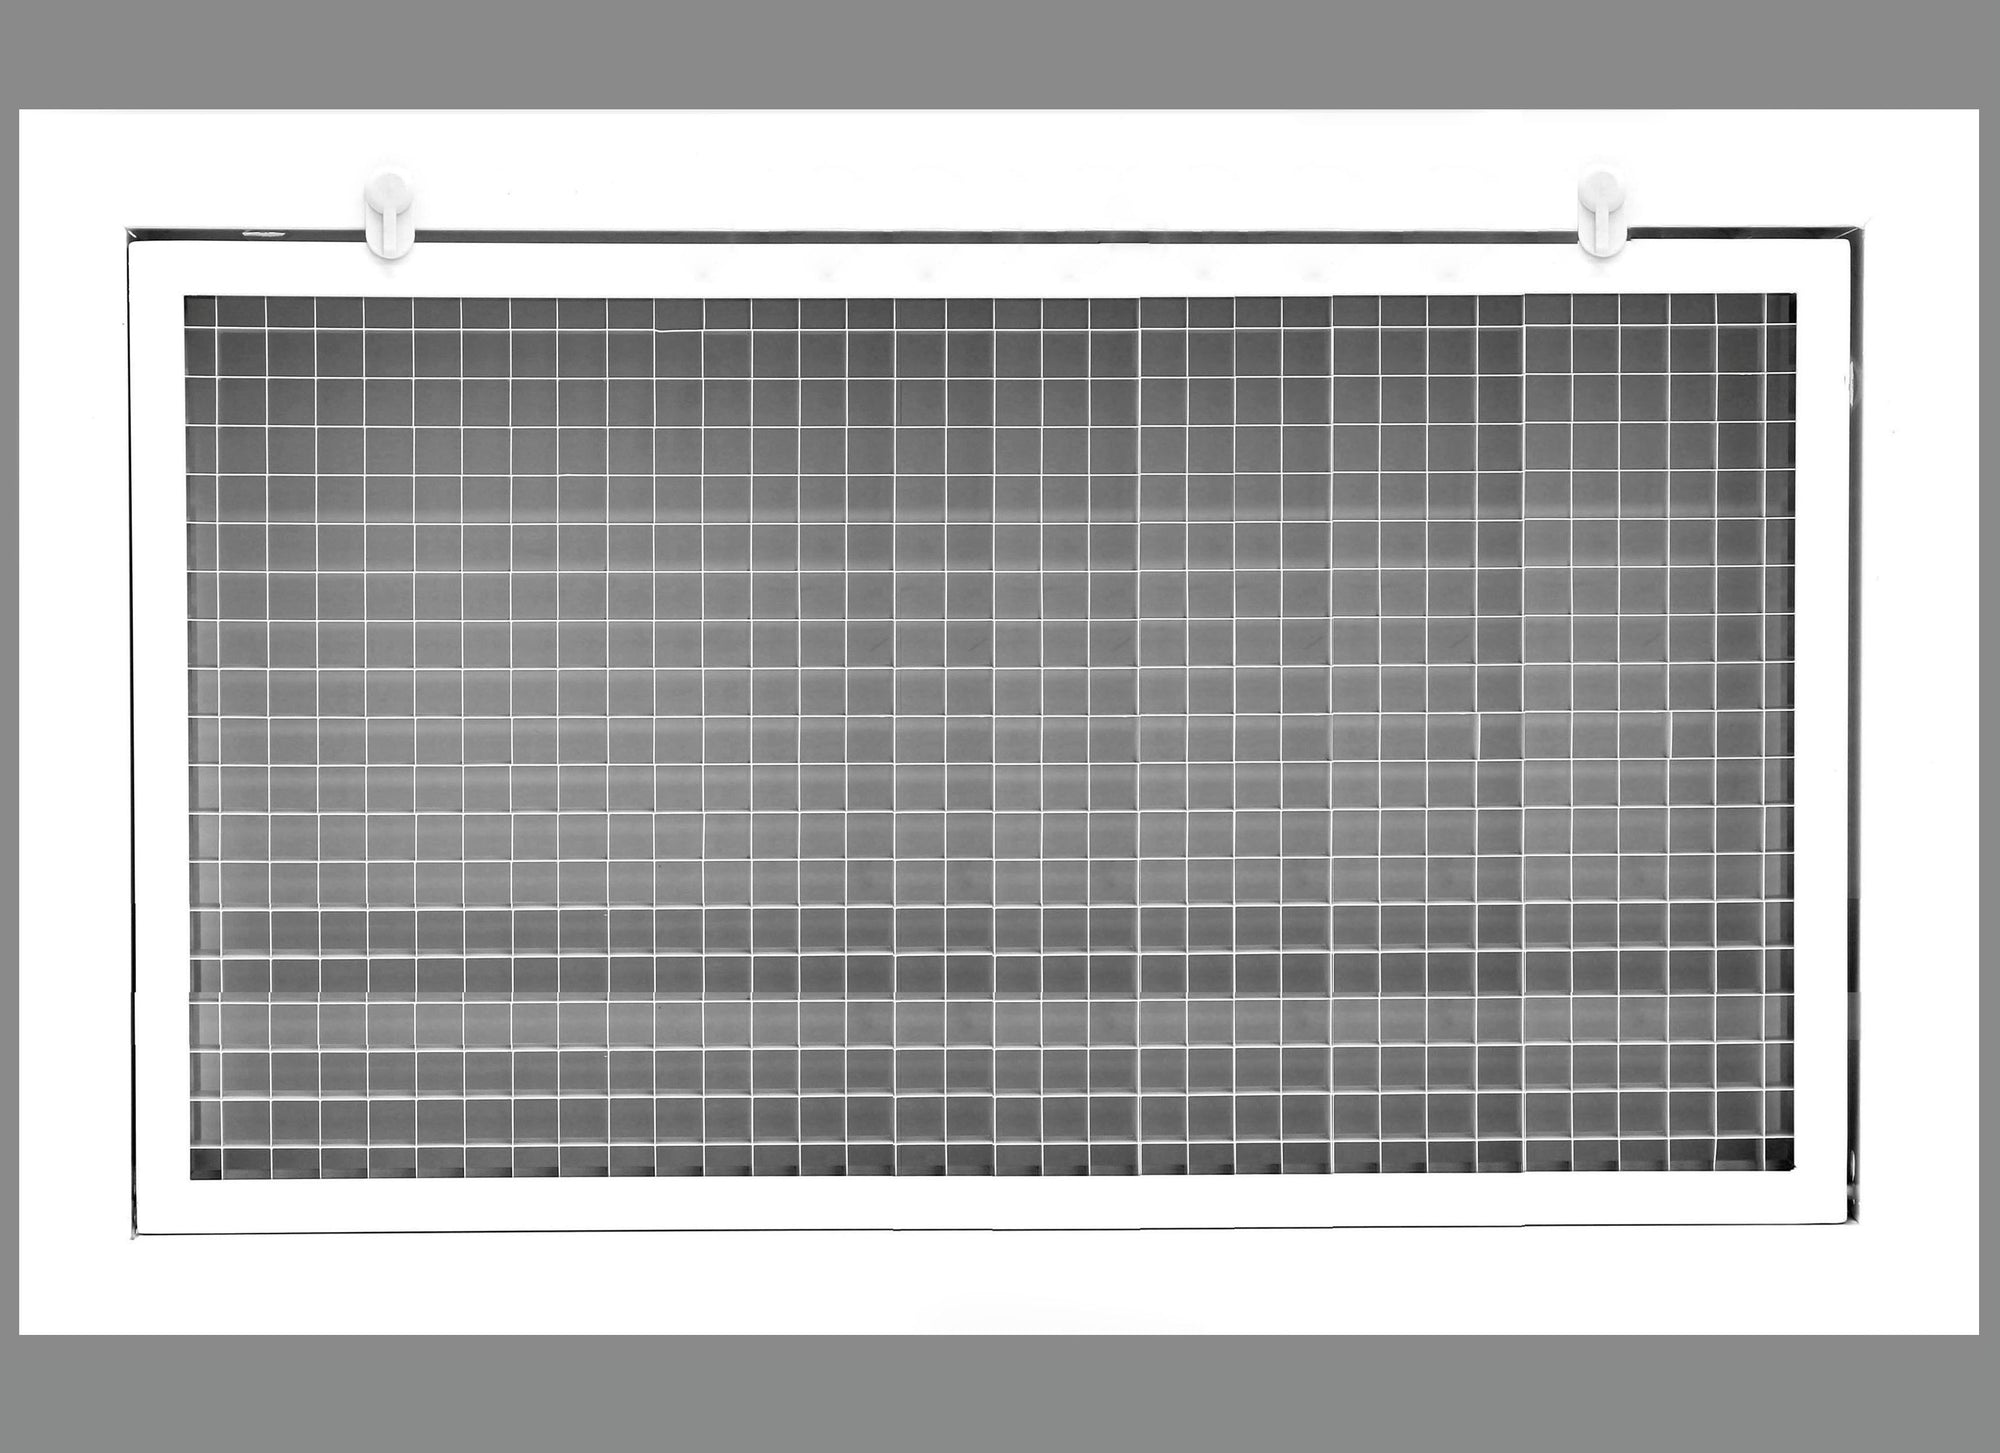 30" x 18" Cube Core Eggcrate Return Air Filter Grille for 1" Filter